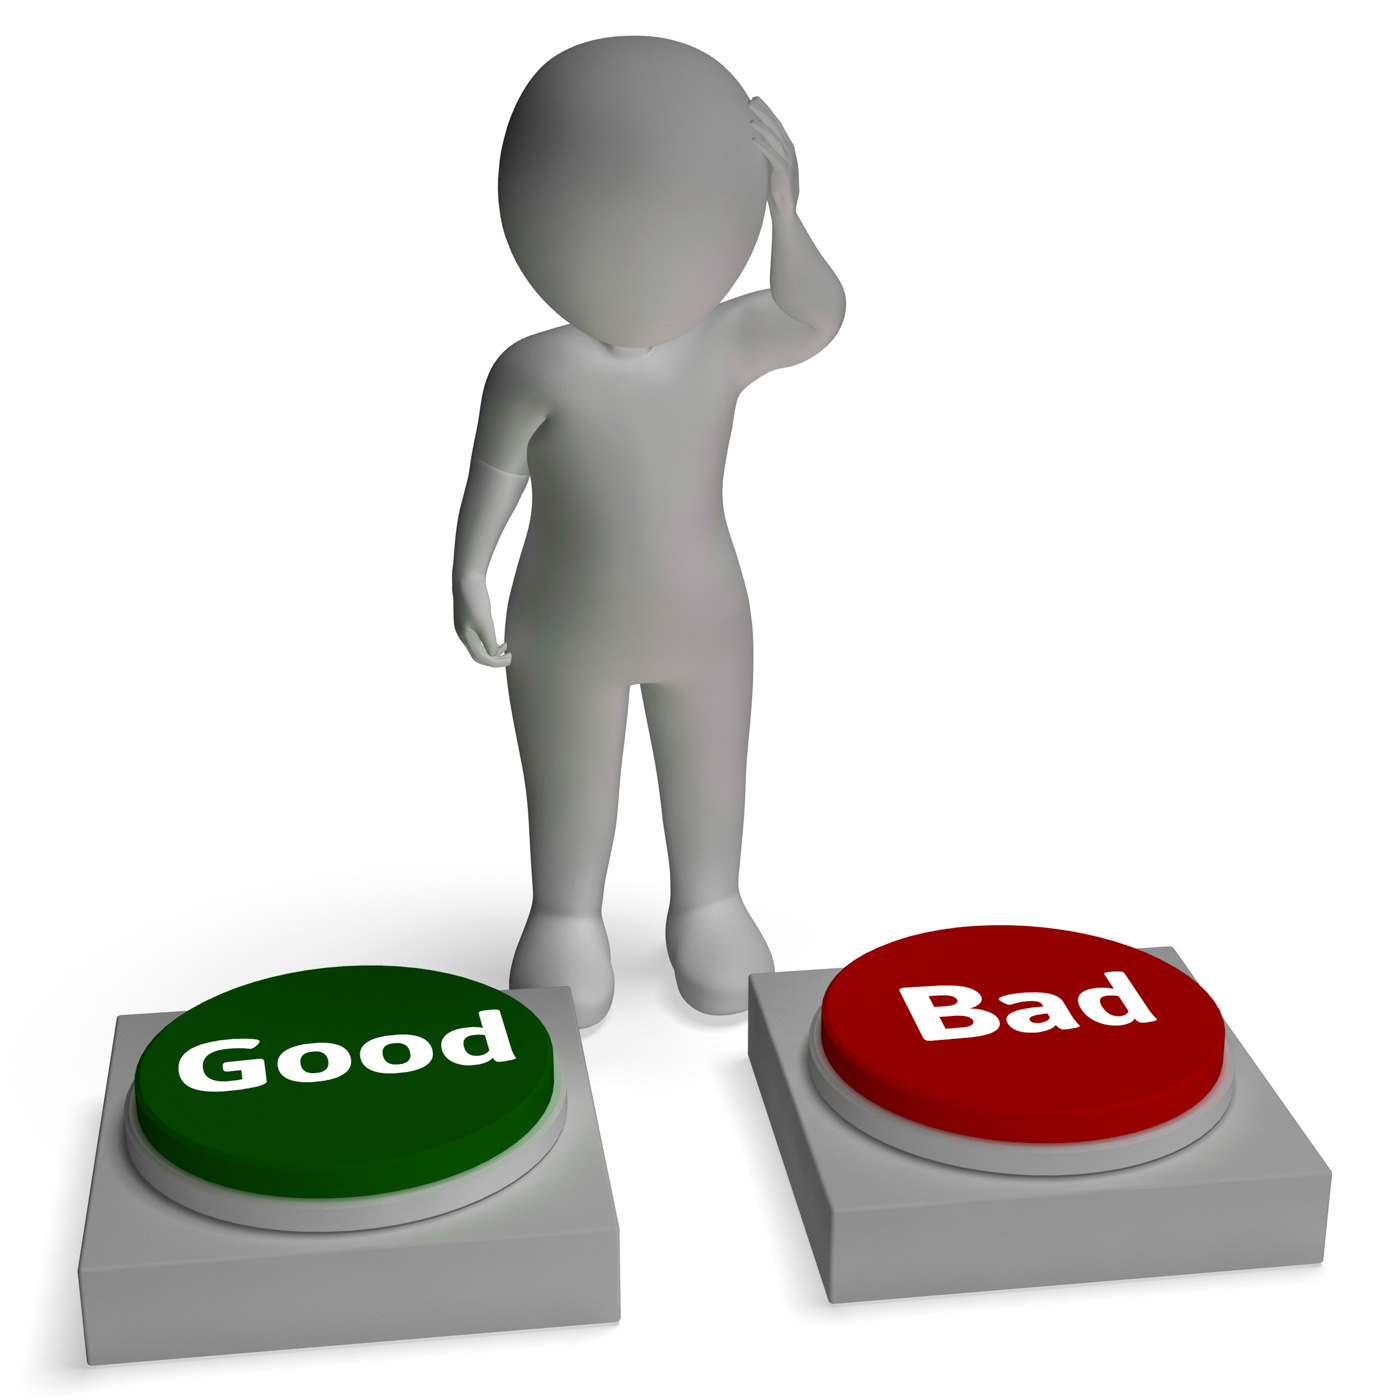 Good Bad Buttons Shows Approve Or Reject, Accept, Good, Verified, Validation, HQ Photo